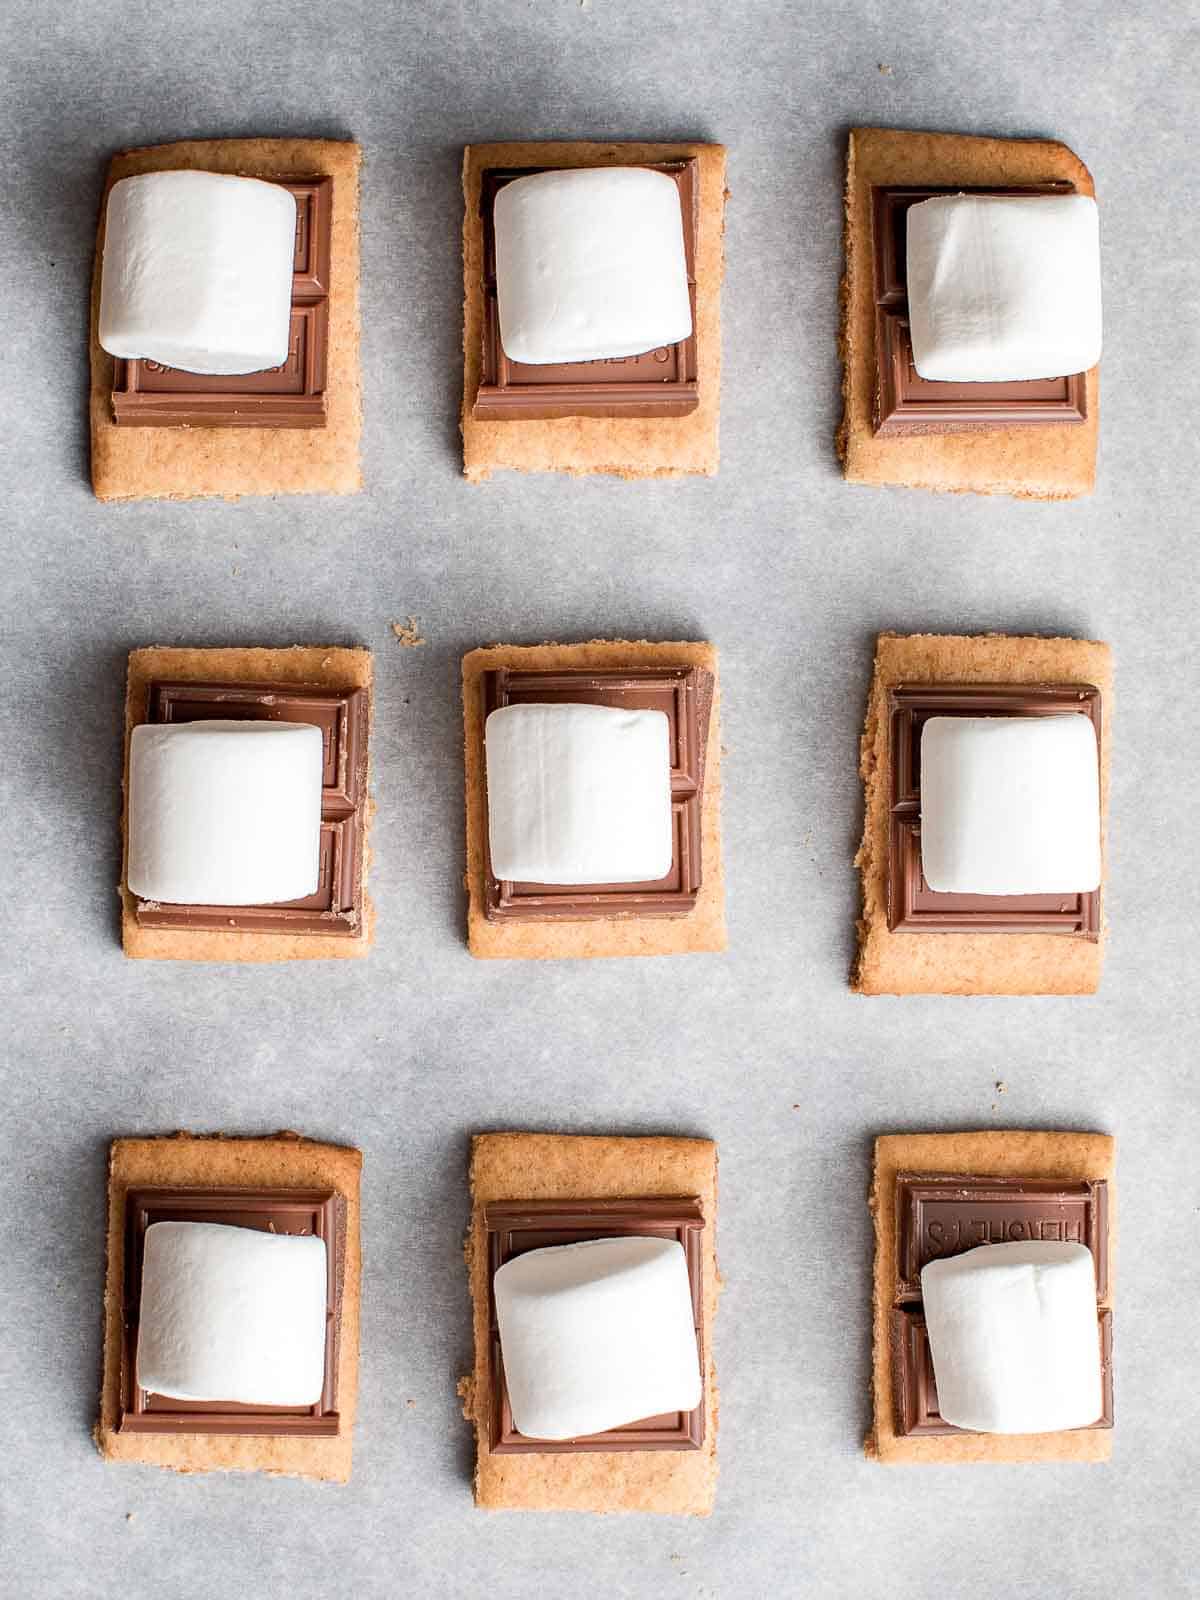 Smores before being put in the oven.